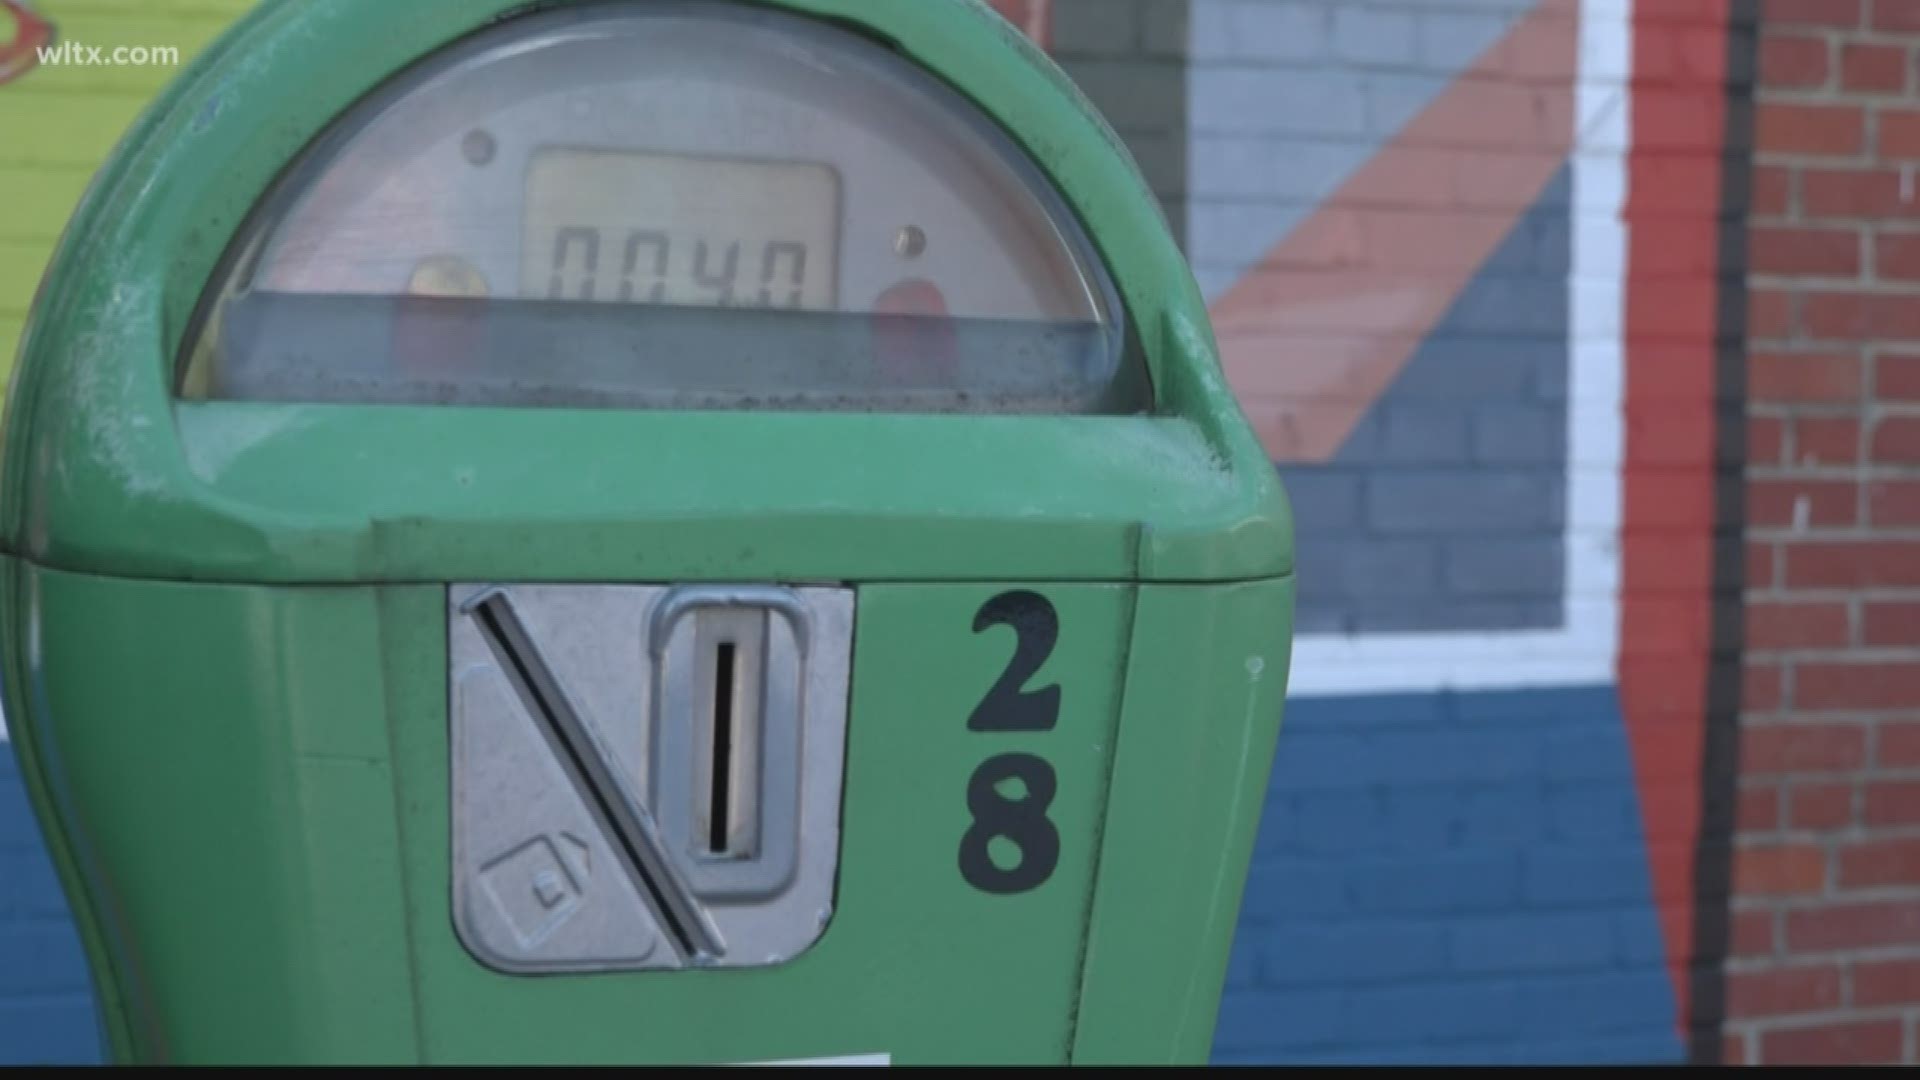 The hours for parking meters in Columbia's Five Points could be extended, and Saturday could be added too.